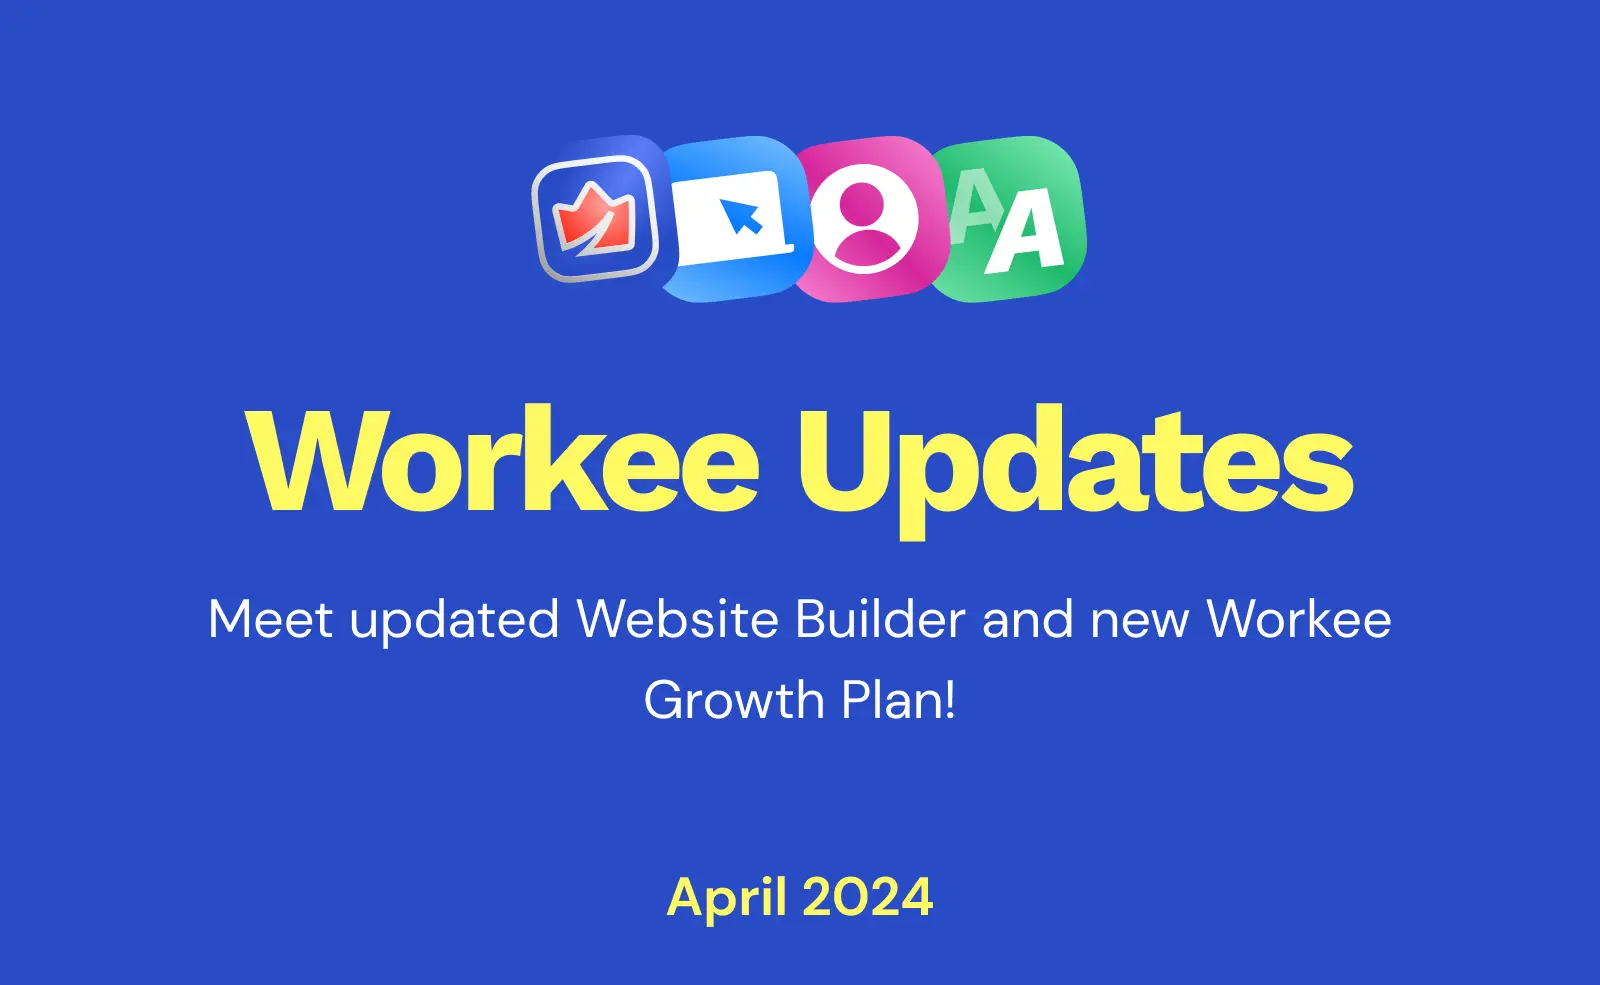 Workee Product Updates: April 2024